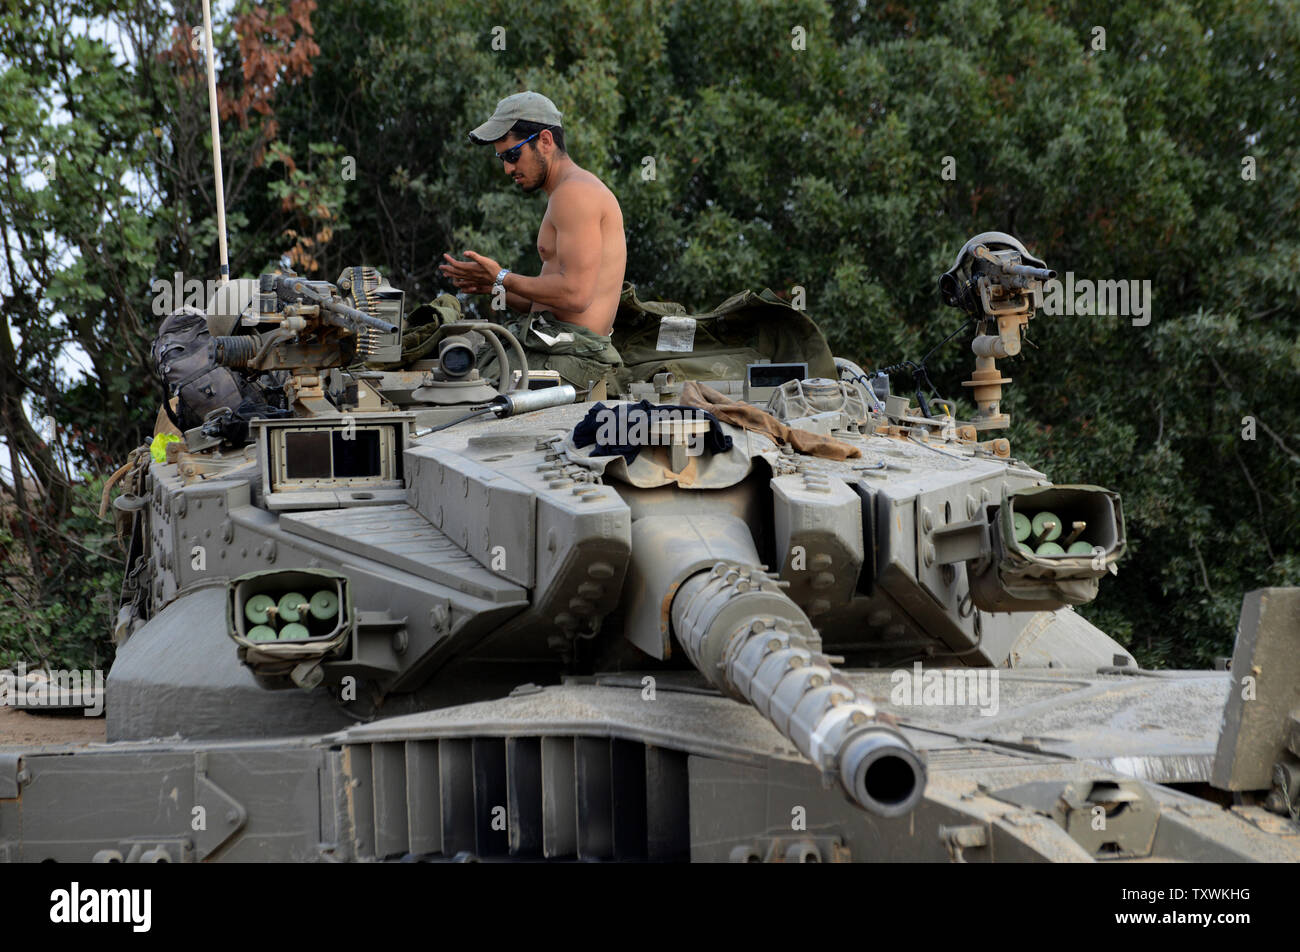 An Israeli soldier works on a merkava tank at a staging area at an unspecified  location near the Israeli border with the Gaza Strip in southern Israel,  July 28, 2014.  Fighting between Israel and Hamas was quieter on the first day of the Muslim holiday of Eid Al Fitr, after pressure from the UN Security Council and US President Barak Obama for an immediate ceasefire.  UPI/Debbie Hill Stock Photo